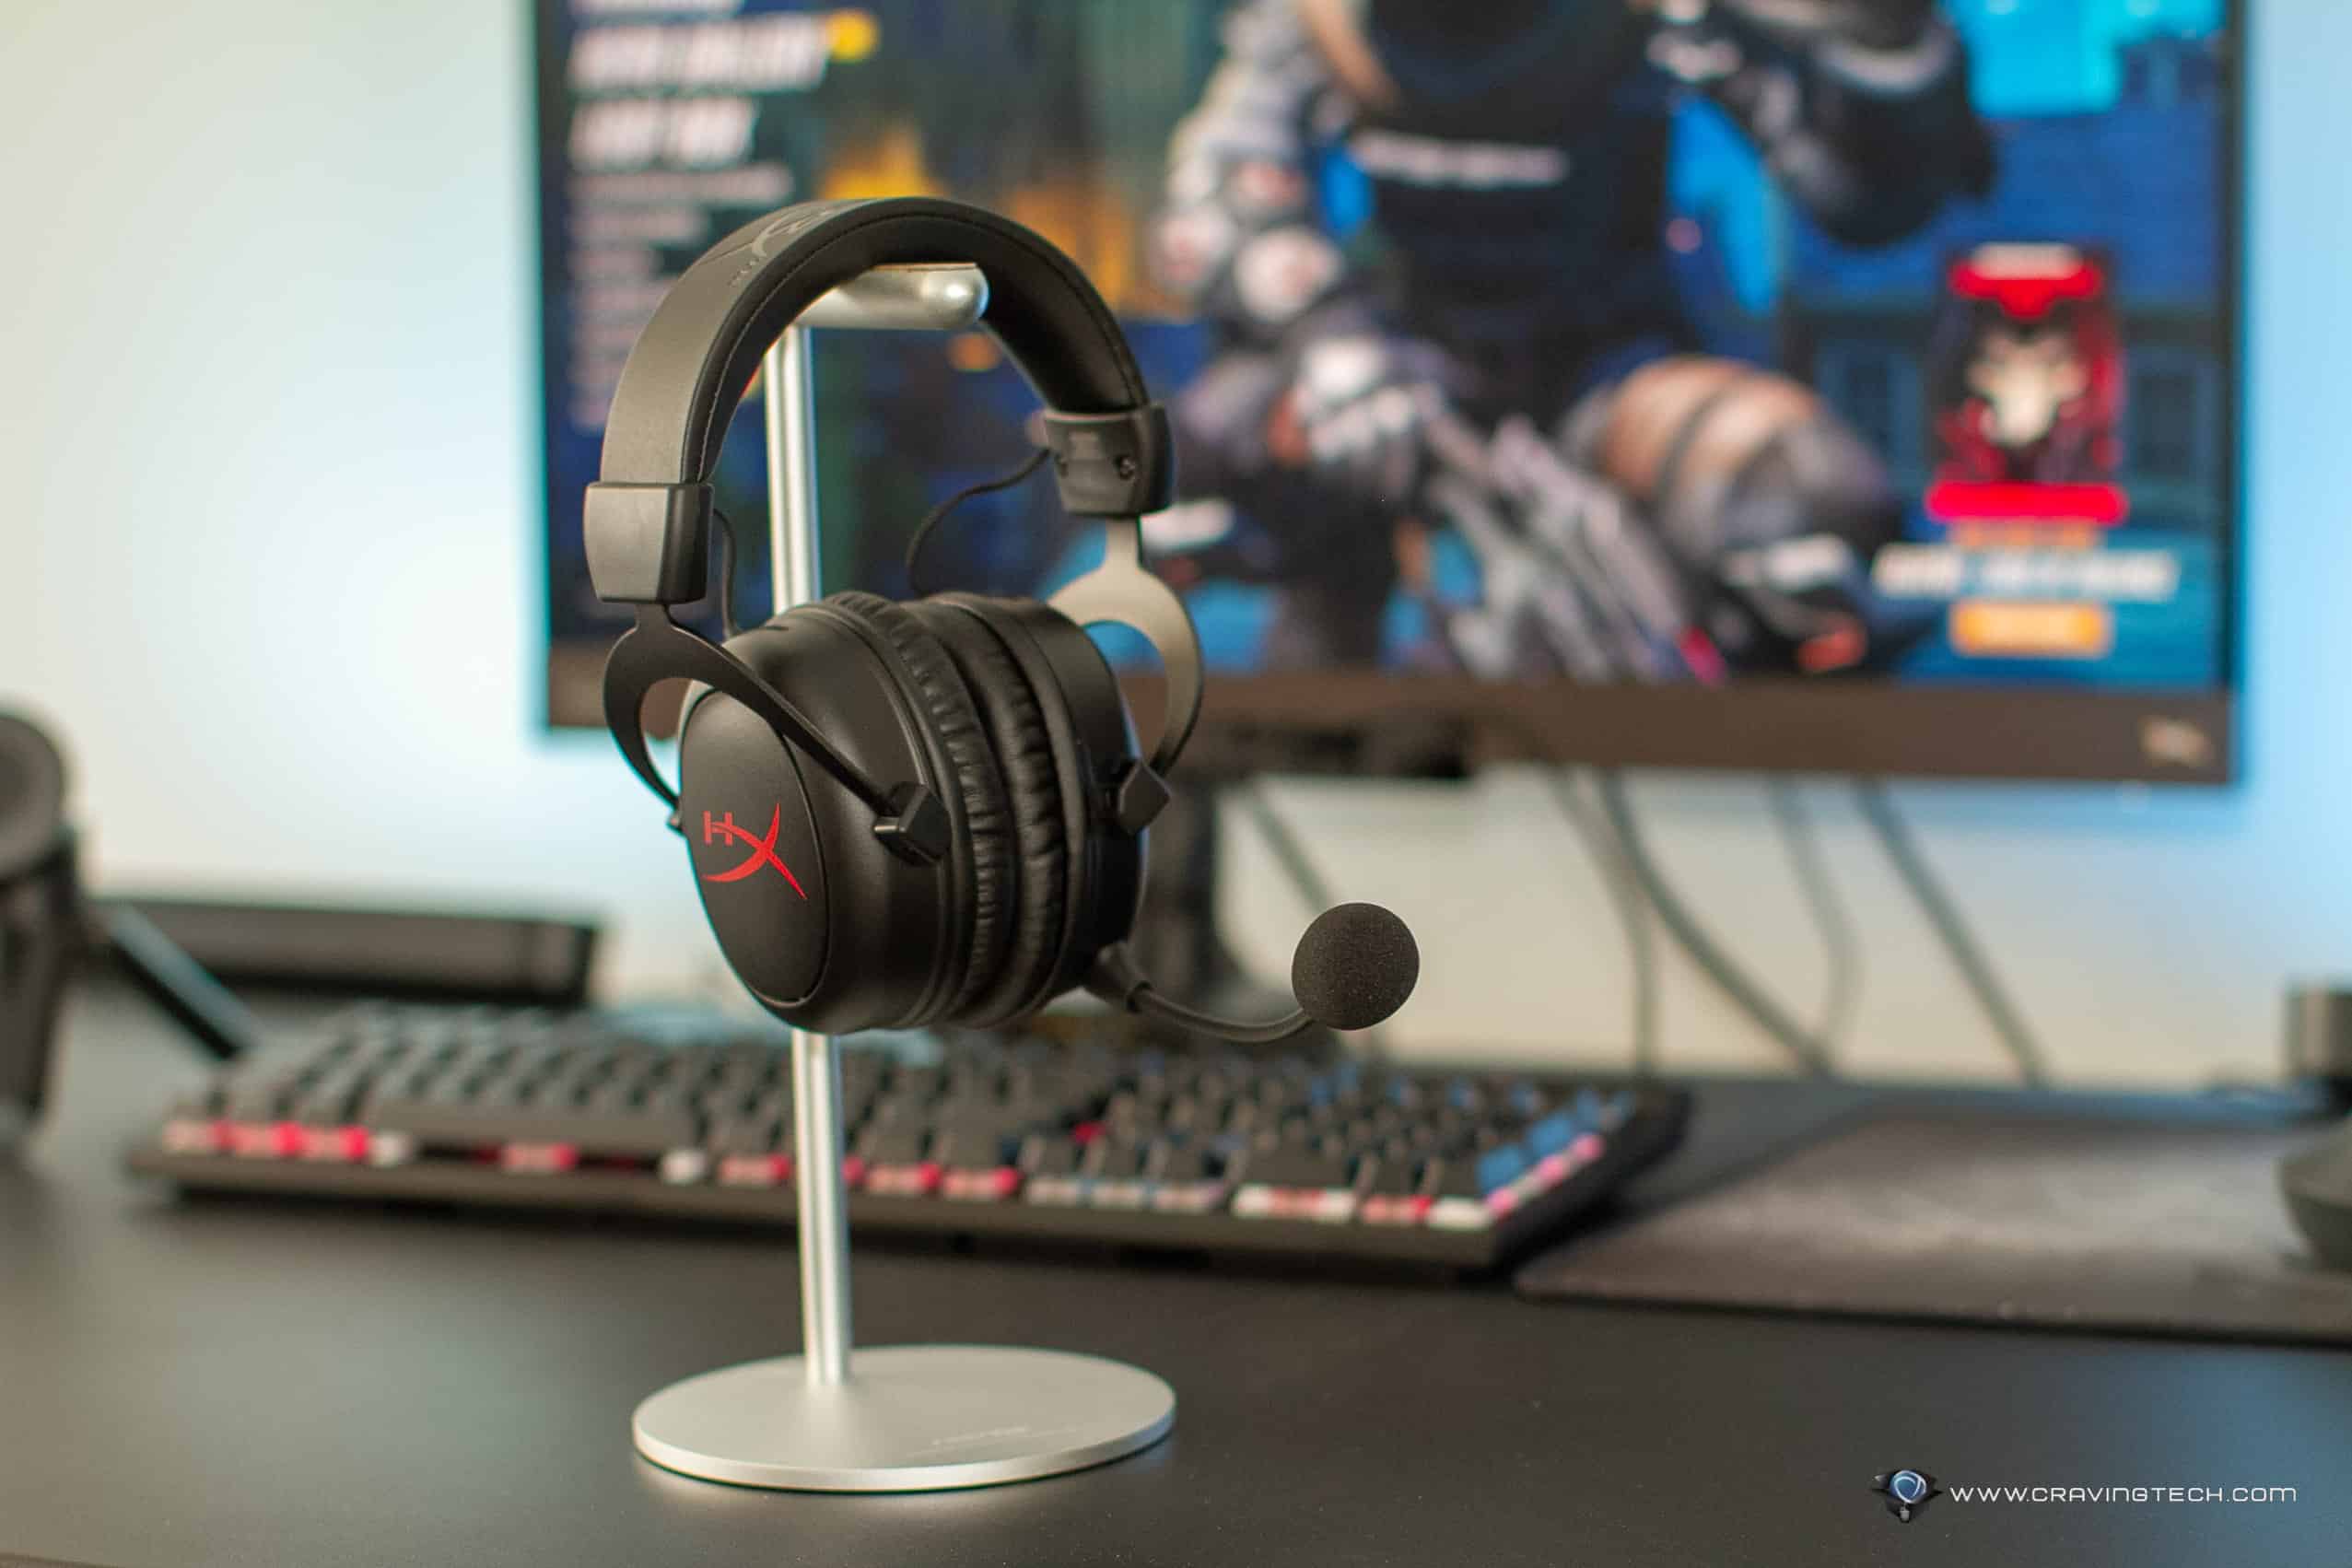 A great value for just $159 – HyperX Cloud Core Wireless Review